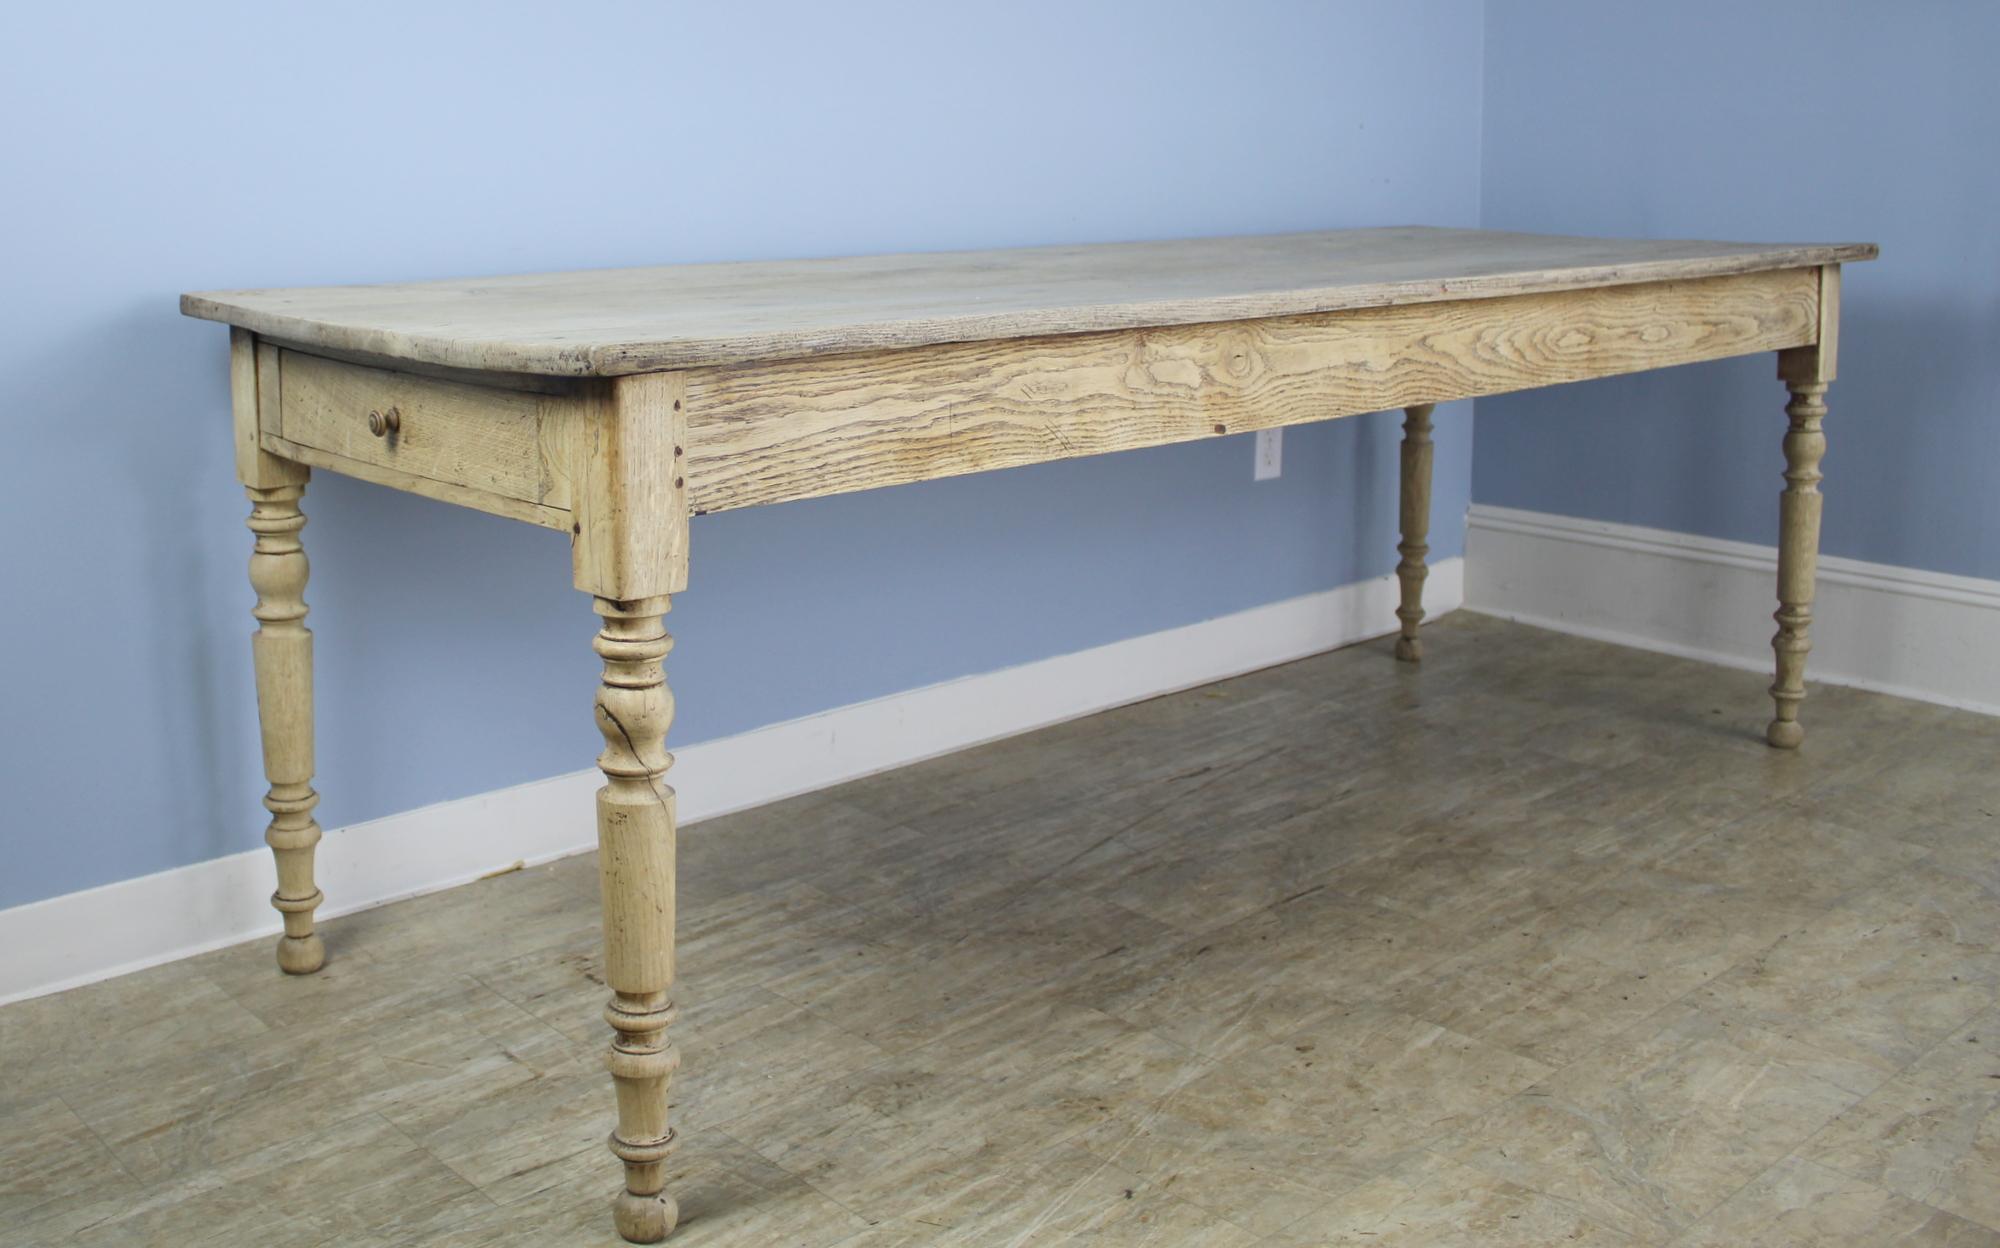 A slim graceful French oak farm table, bleached for a modern casual look. The eye-catching turned legs add a whimsical note, as do the two end drawers. With 79 inches between the legs on the long side, this table can comfortably accommodate 8. 24